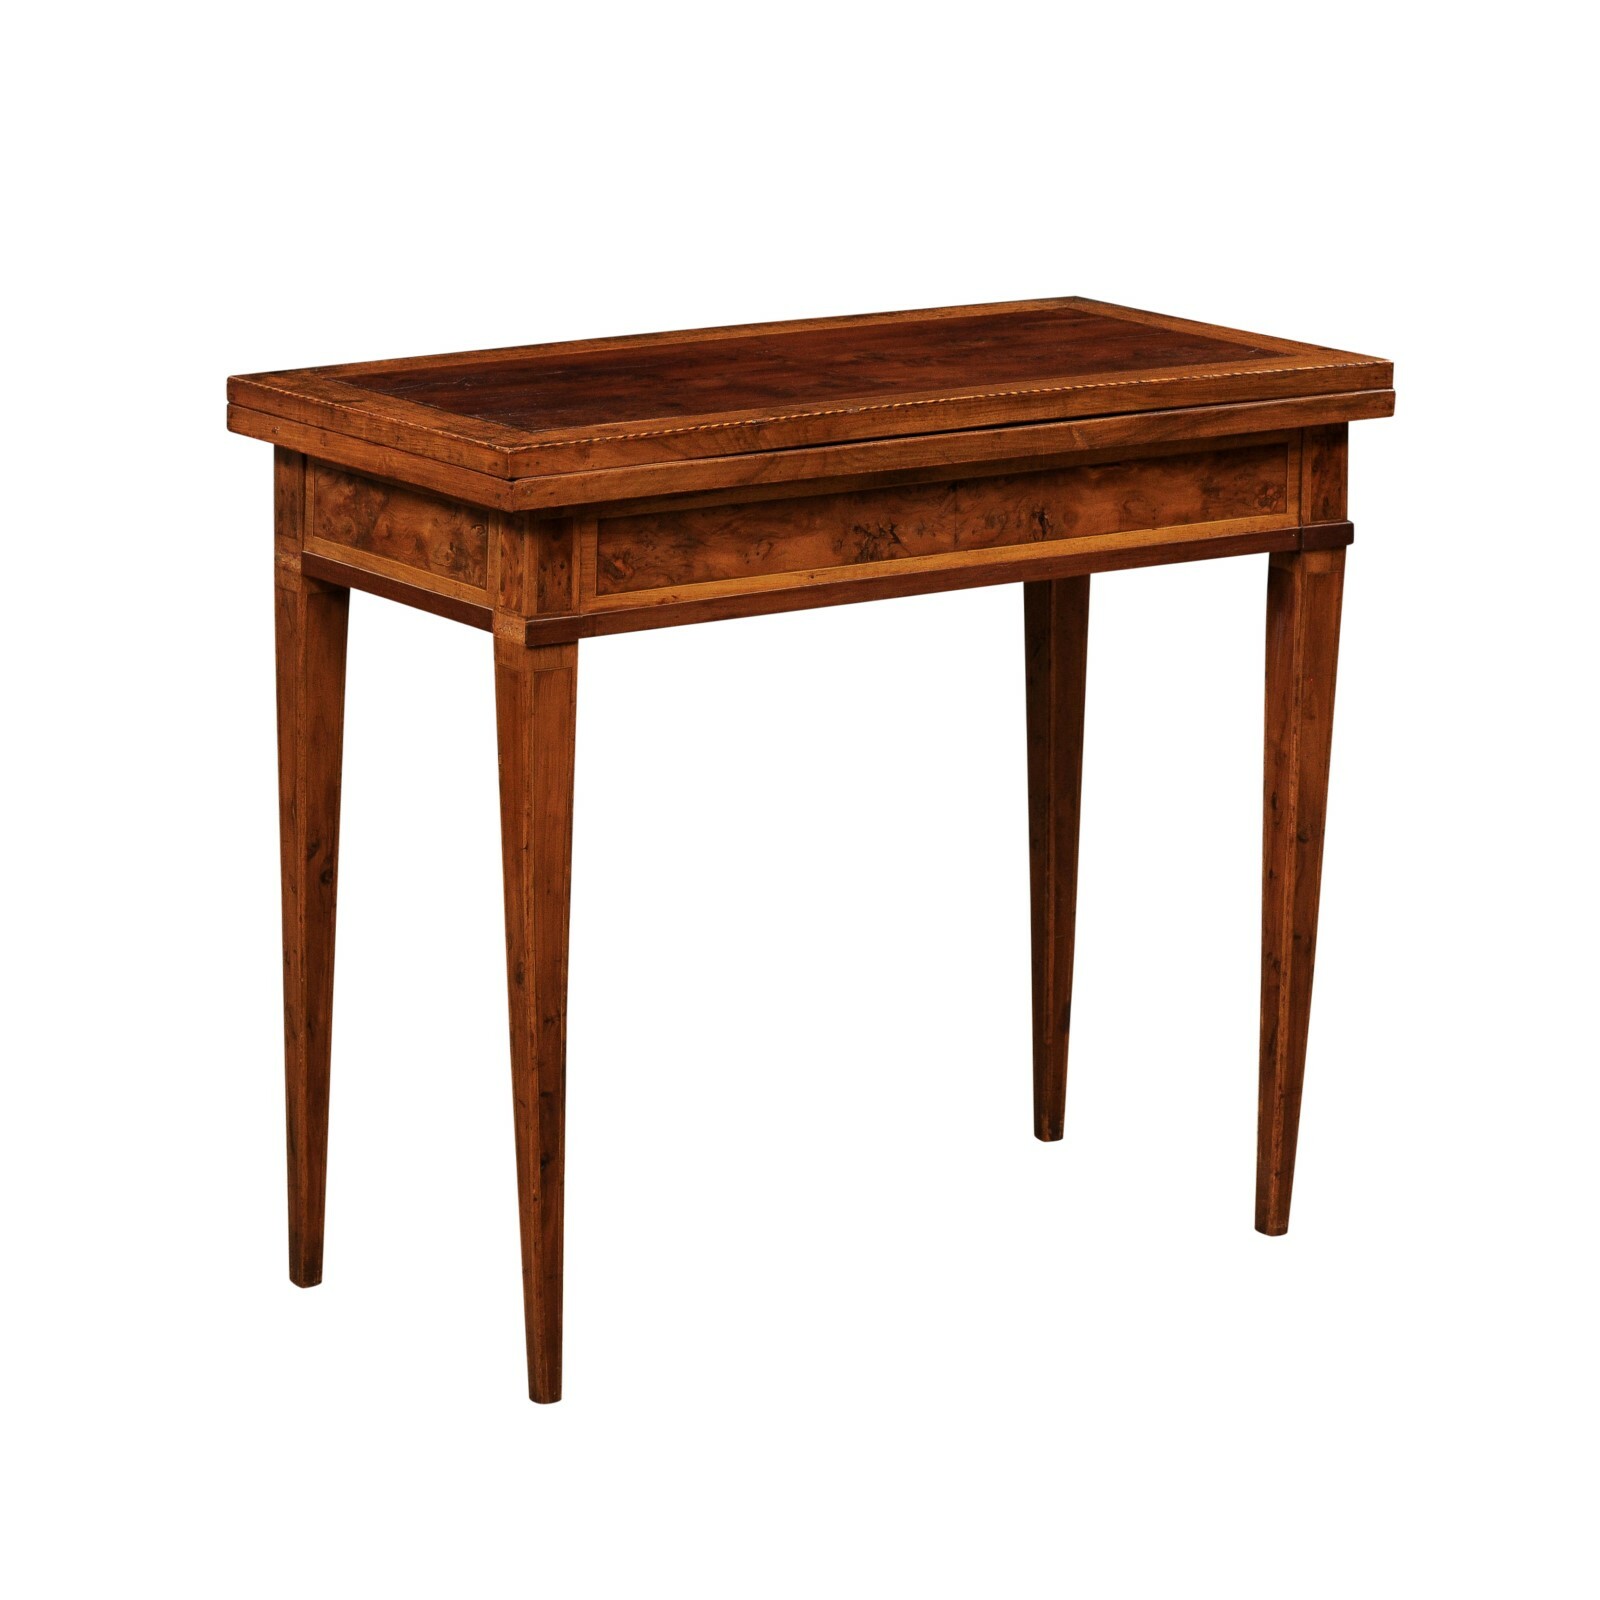 French Petite-Size Flip Top Table, 19th C.